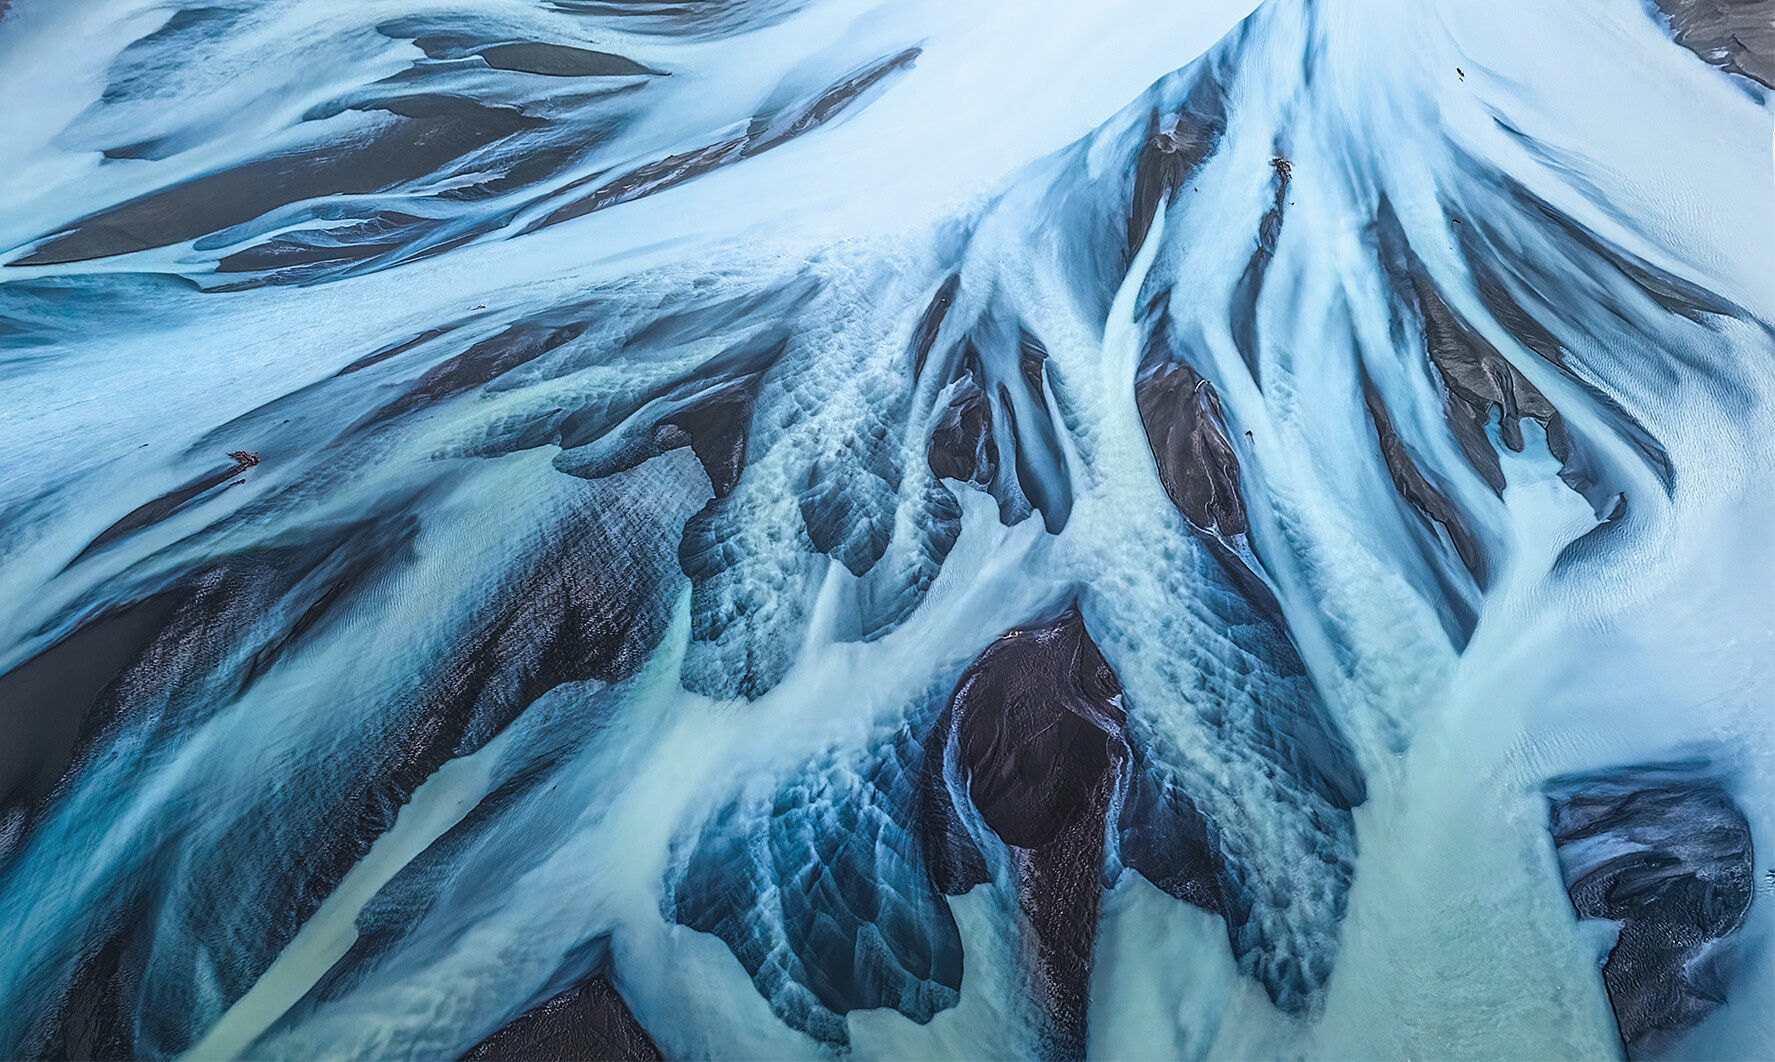 An aerial abstract from one of Alaska's amazing glacial rivers.